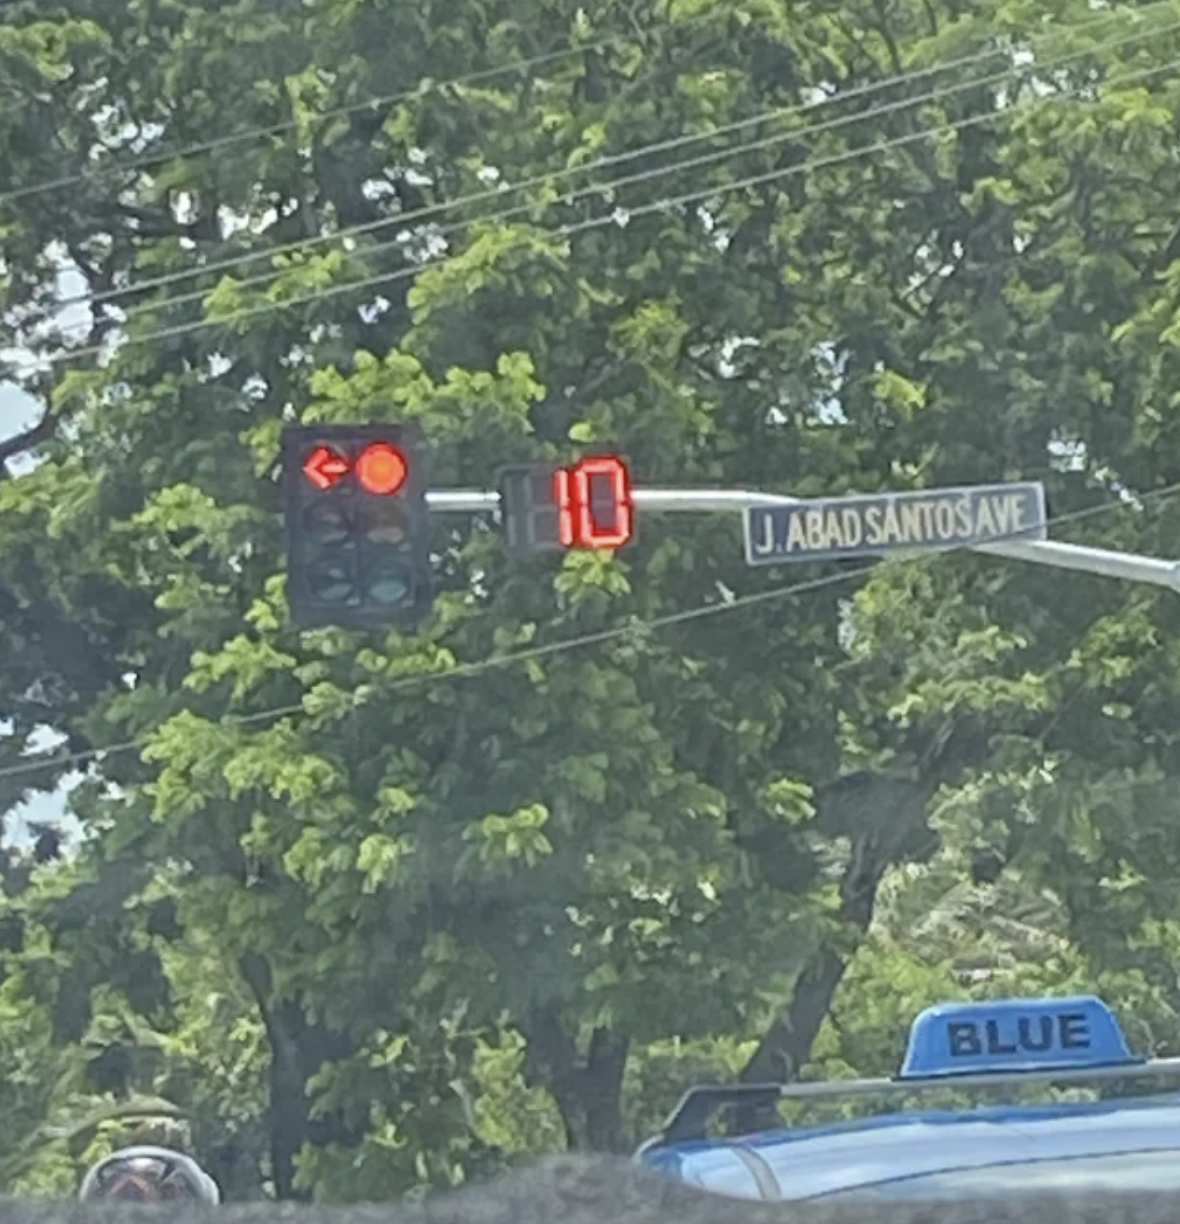 A traffic light displays the normal red, yellow, and green light, and next to it is a digital display that counts down how long it will be until the light changes